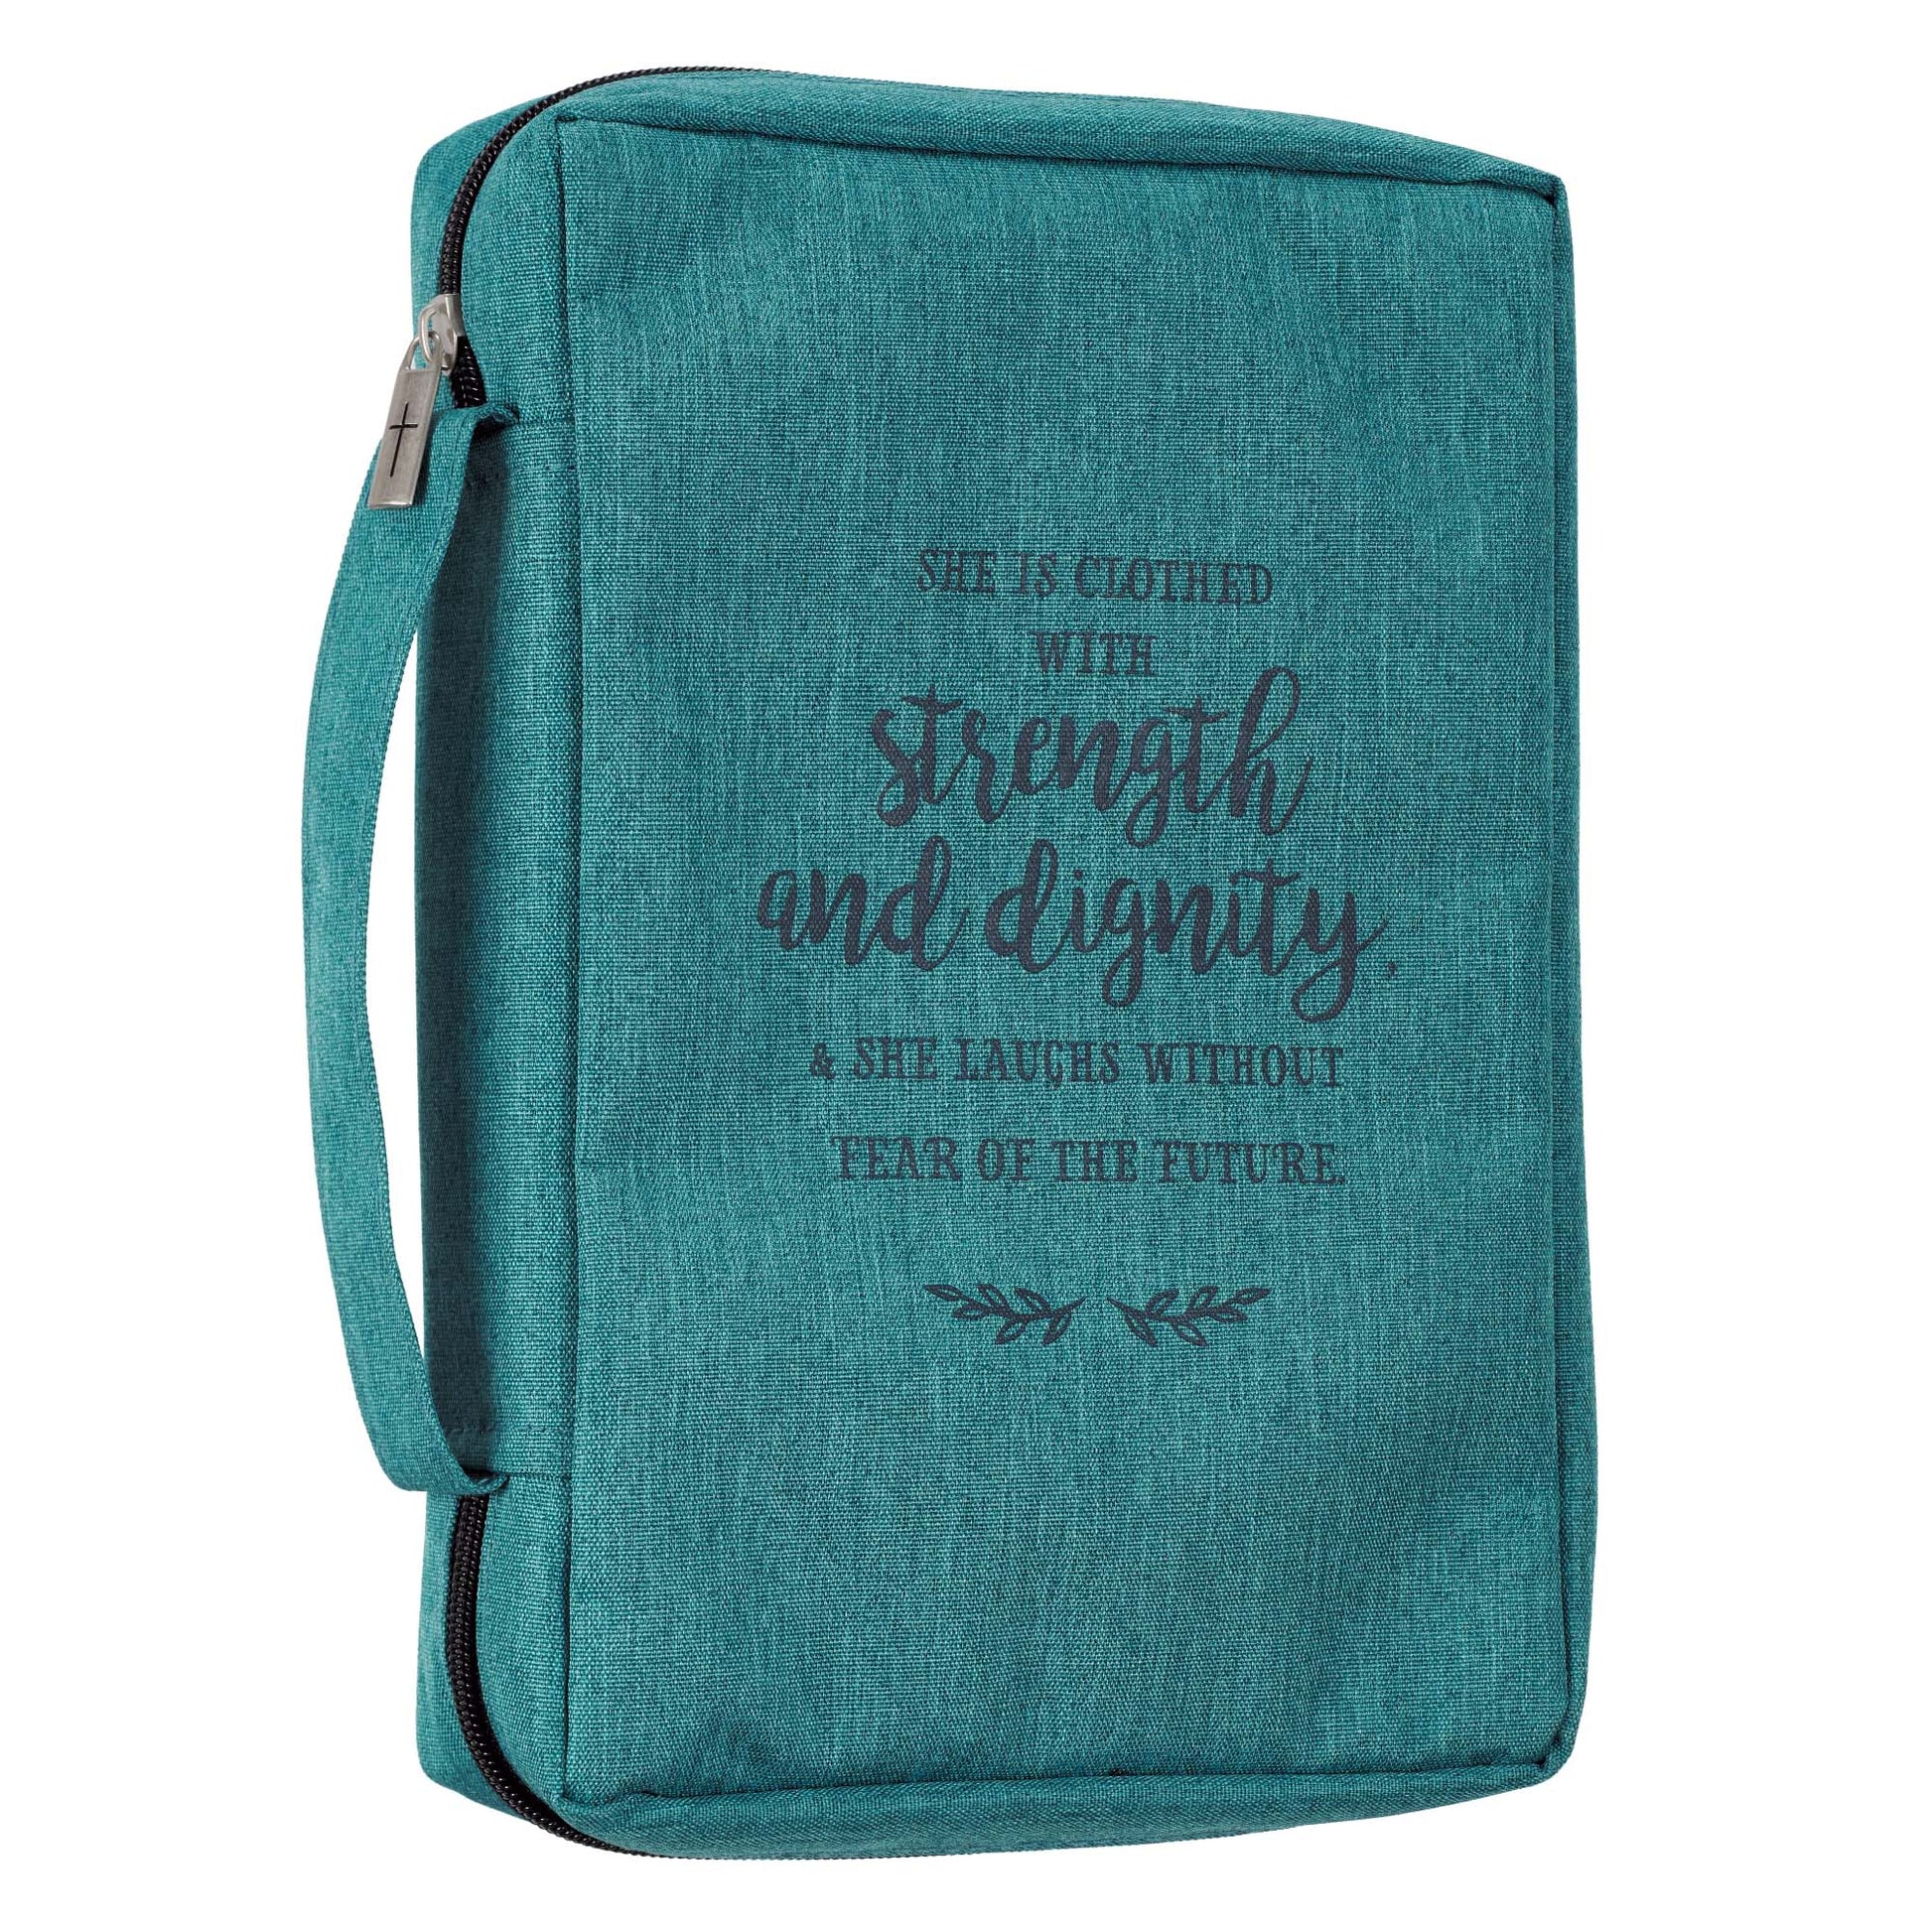 Strength And Dignity Teal Value Bible Cover - The Christian Gift Company